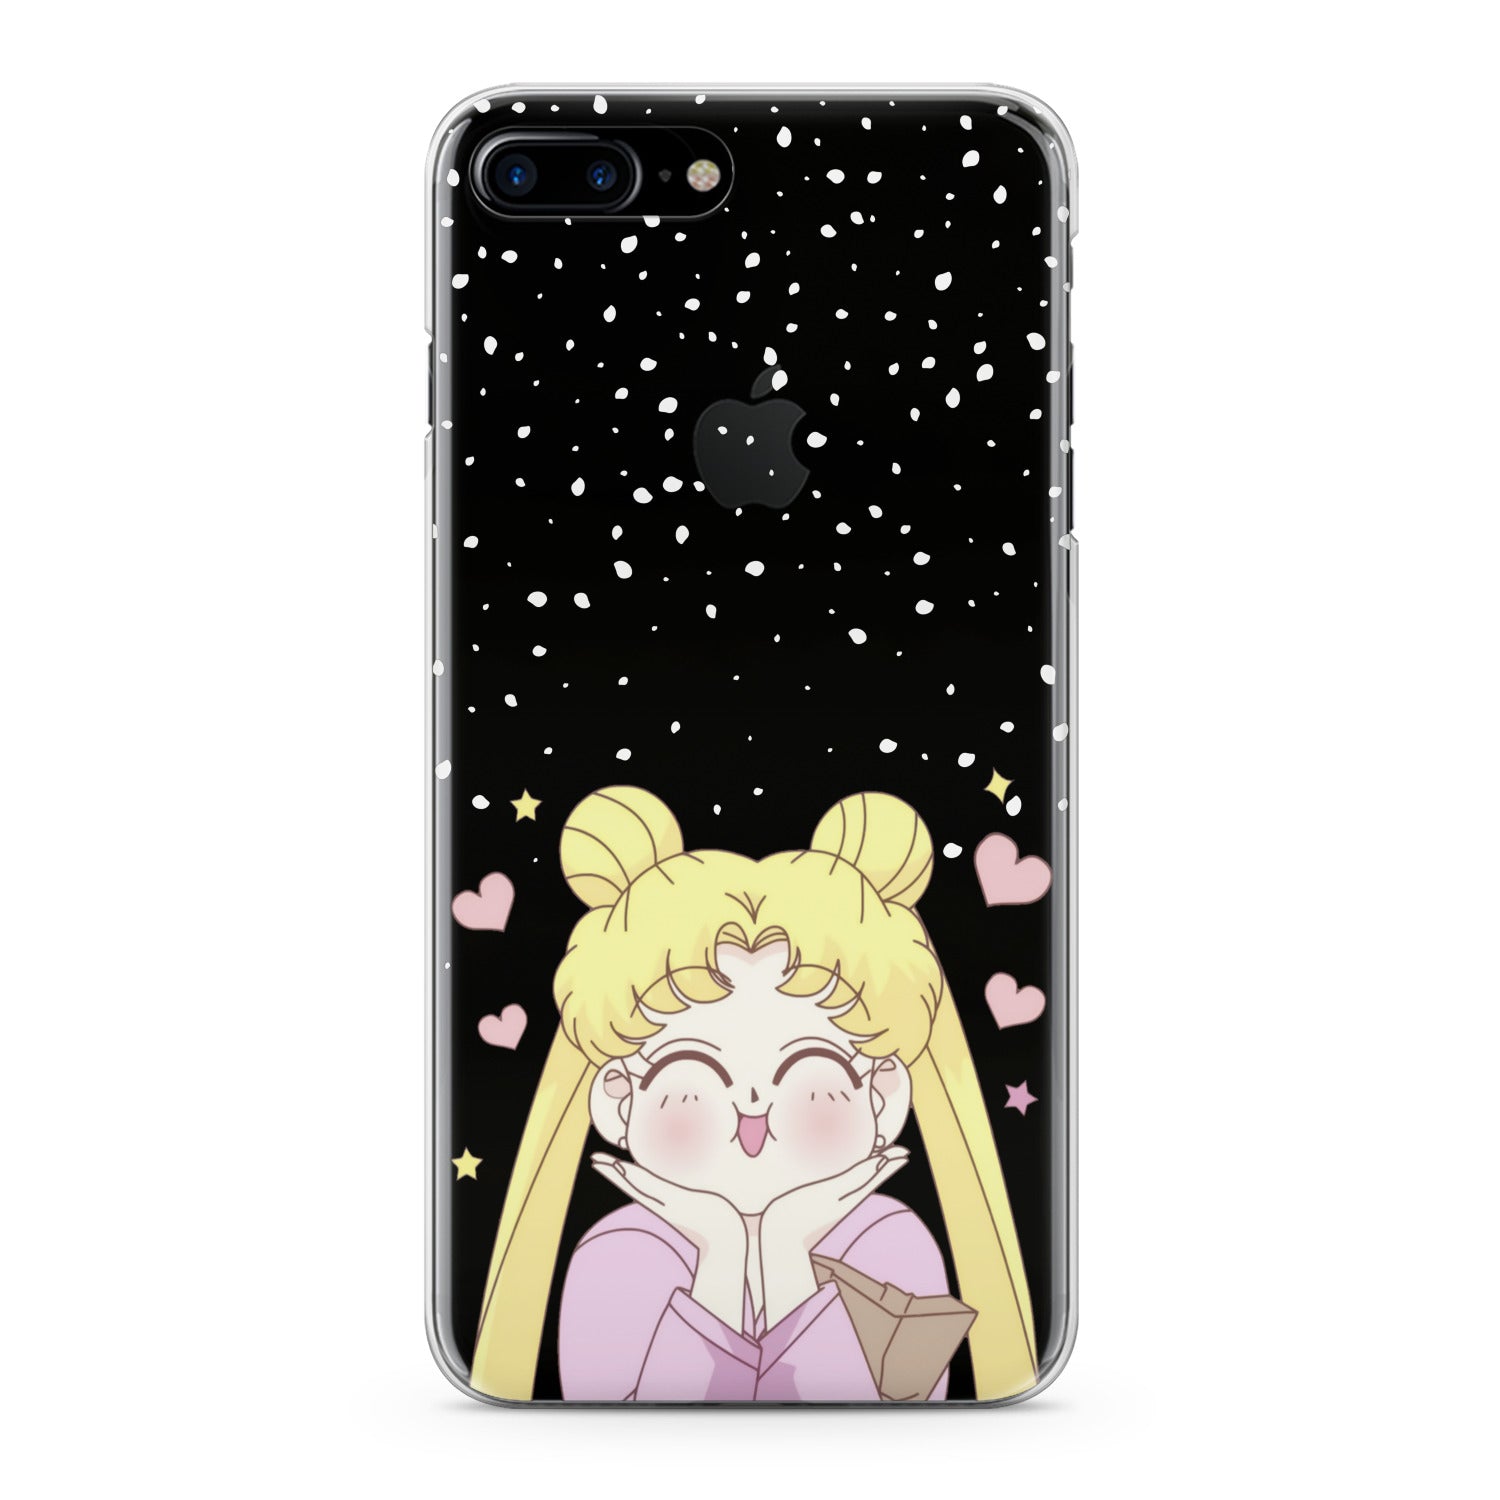 Lex Altern Kawaii Sailor Moon Phone Case for your iPhone & Android phone.